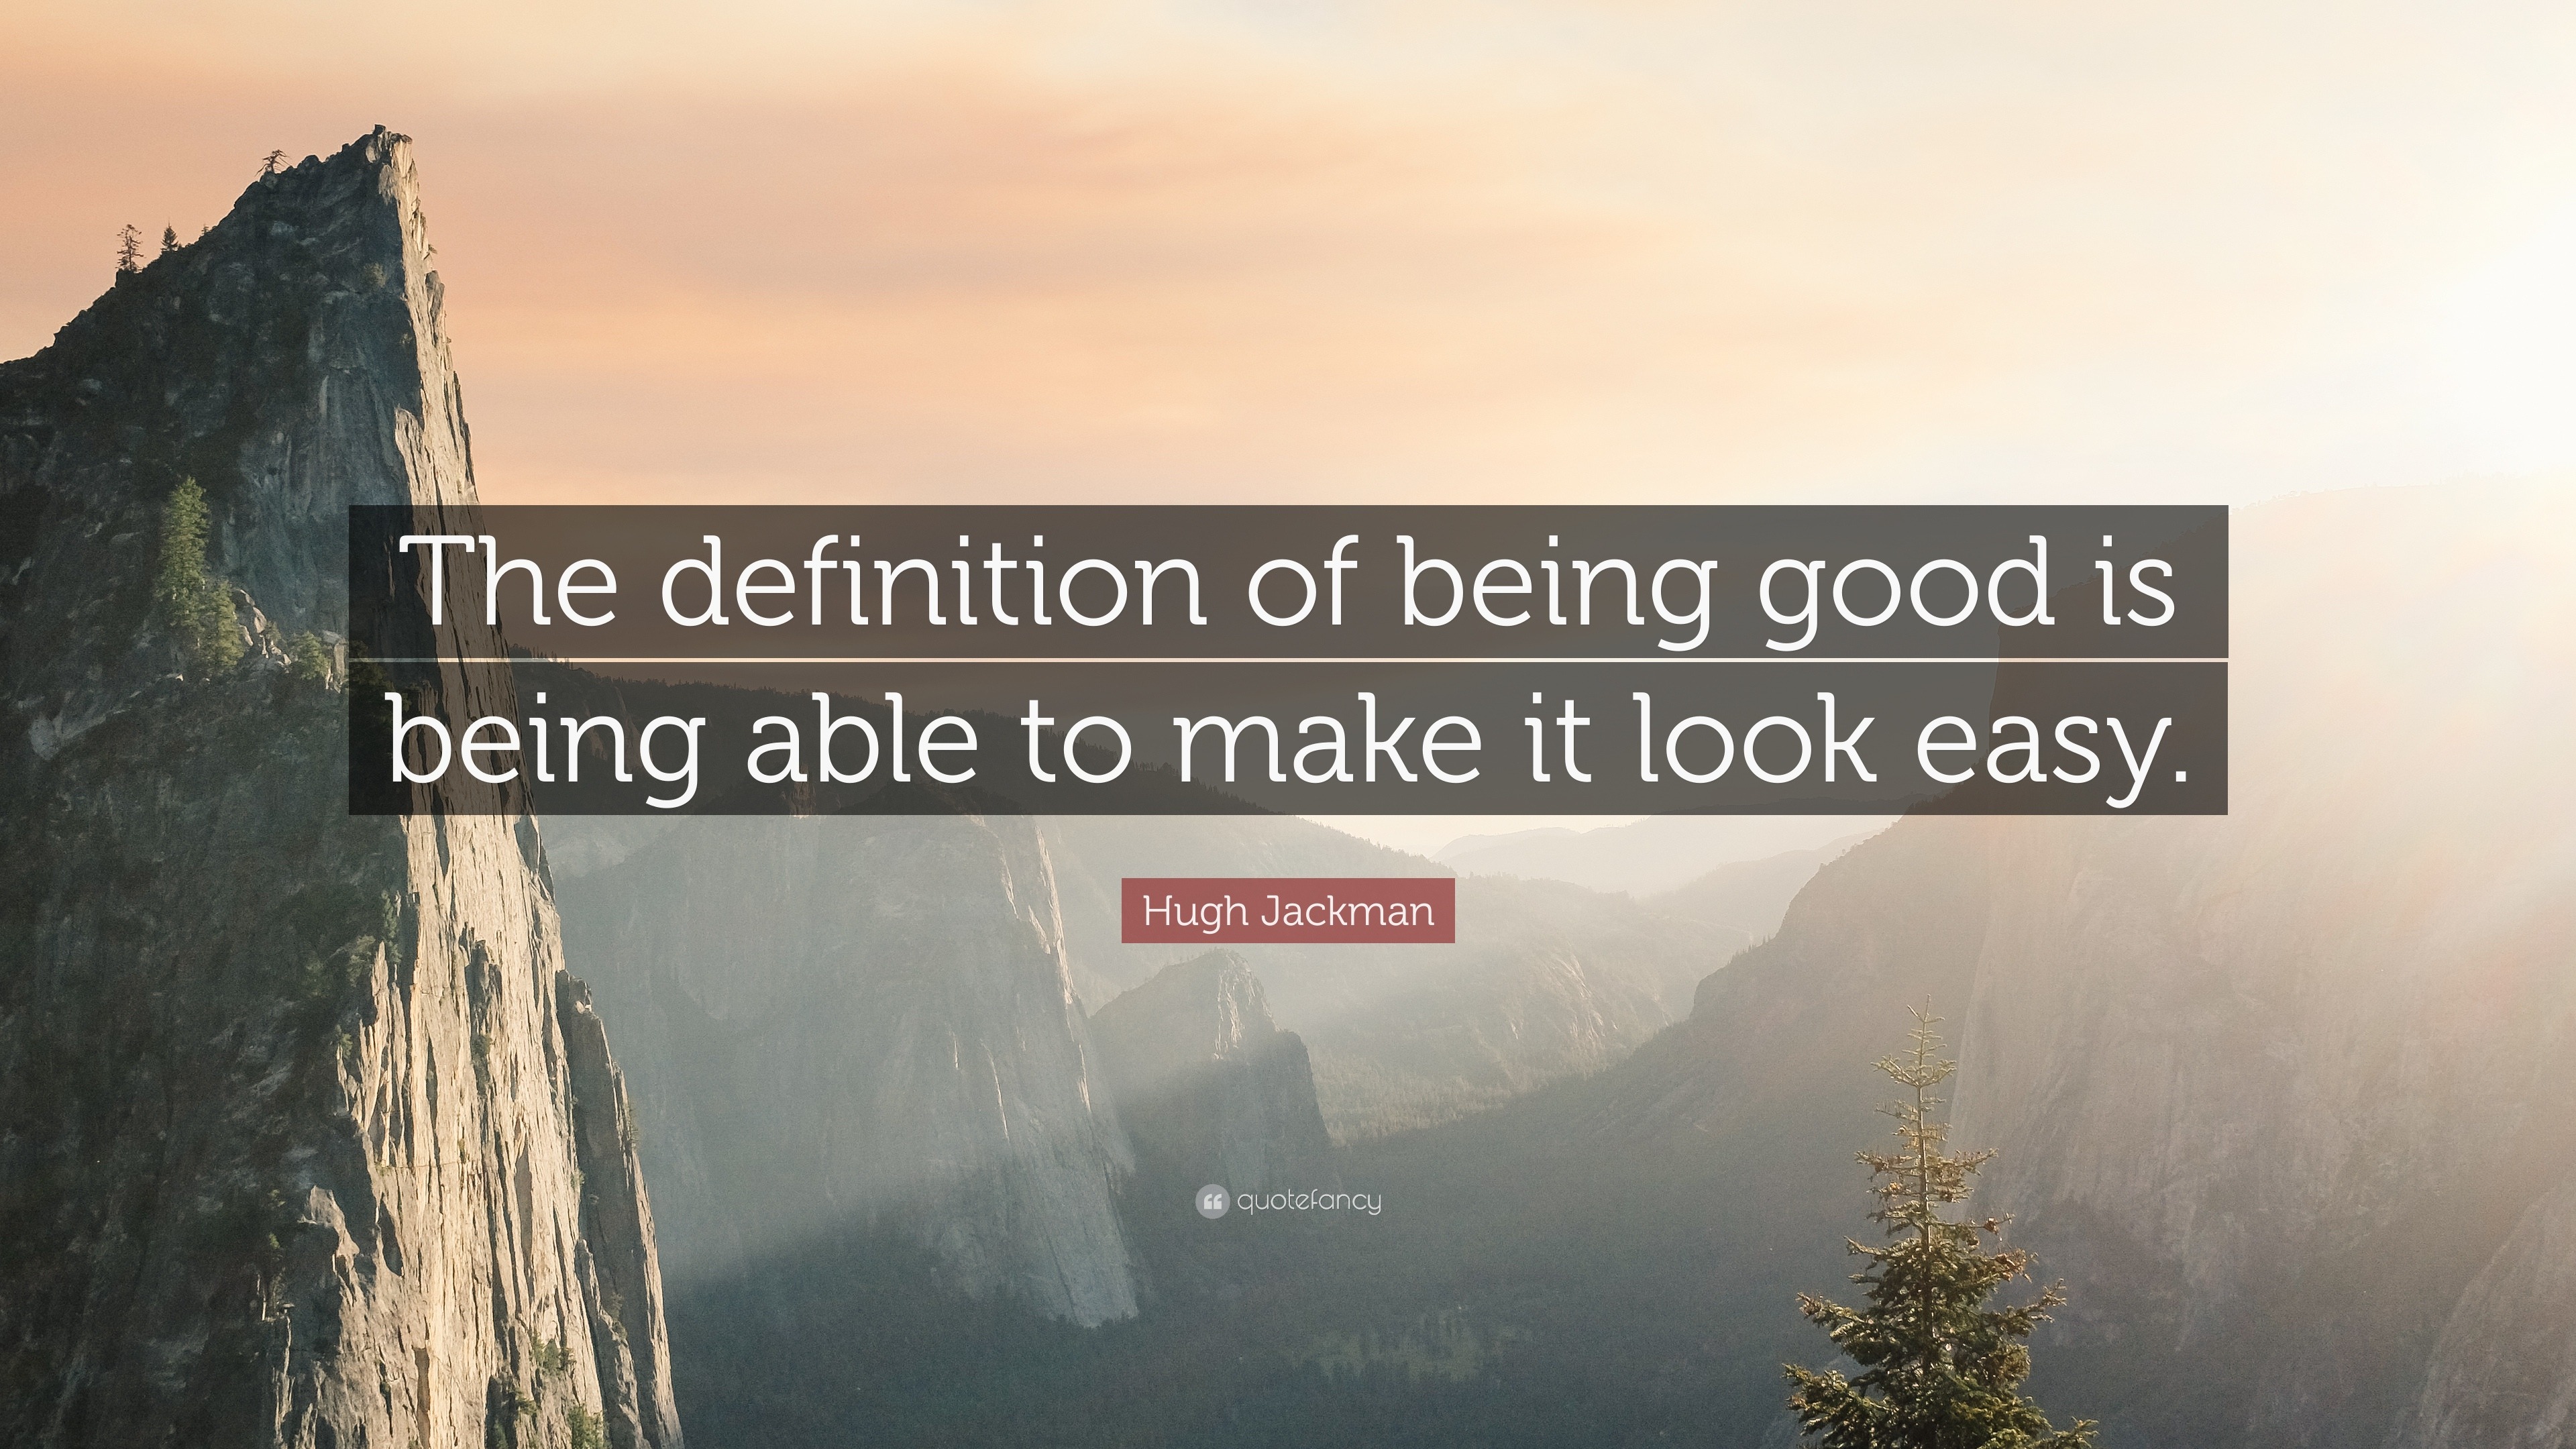 Good-looking Definition & Meaning